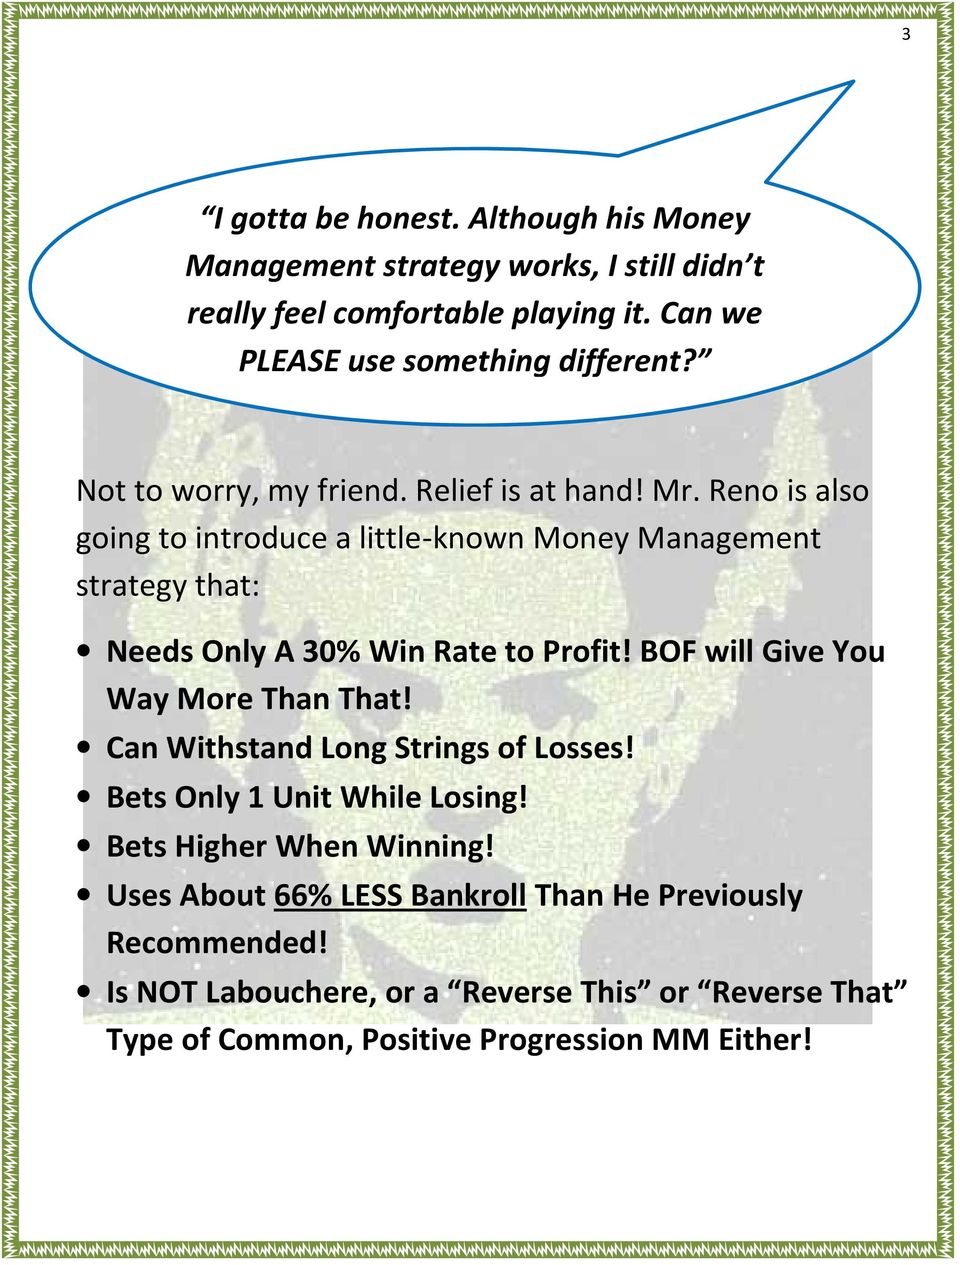 Reno is also going to introduce a little-known Money Management strategy that: Needs Only A 30% Win Rate to Profit! BOF will Give You Way More Than That!